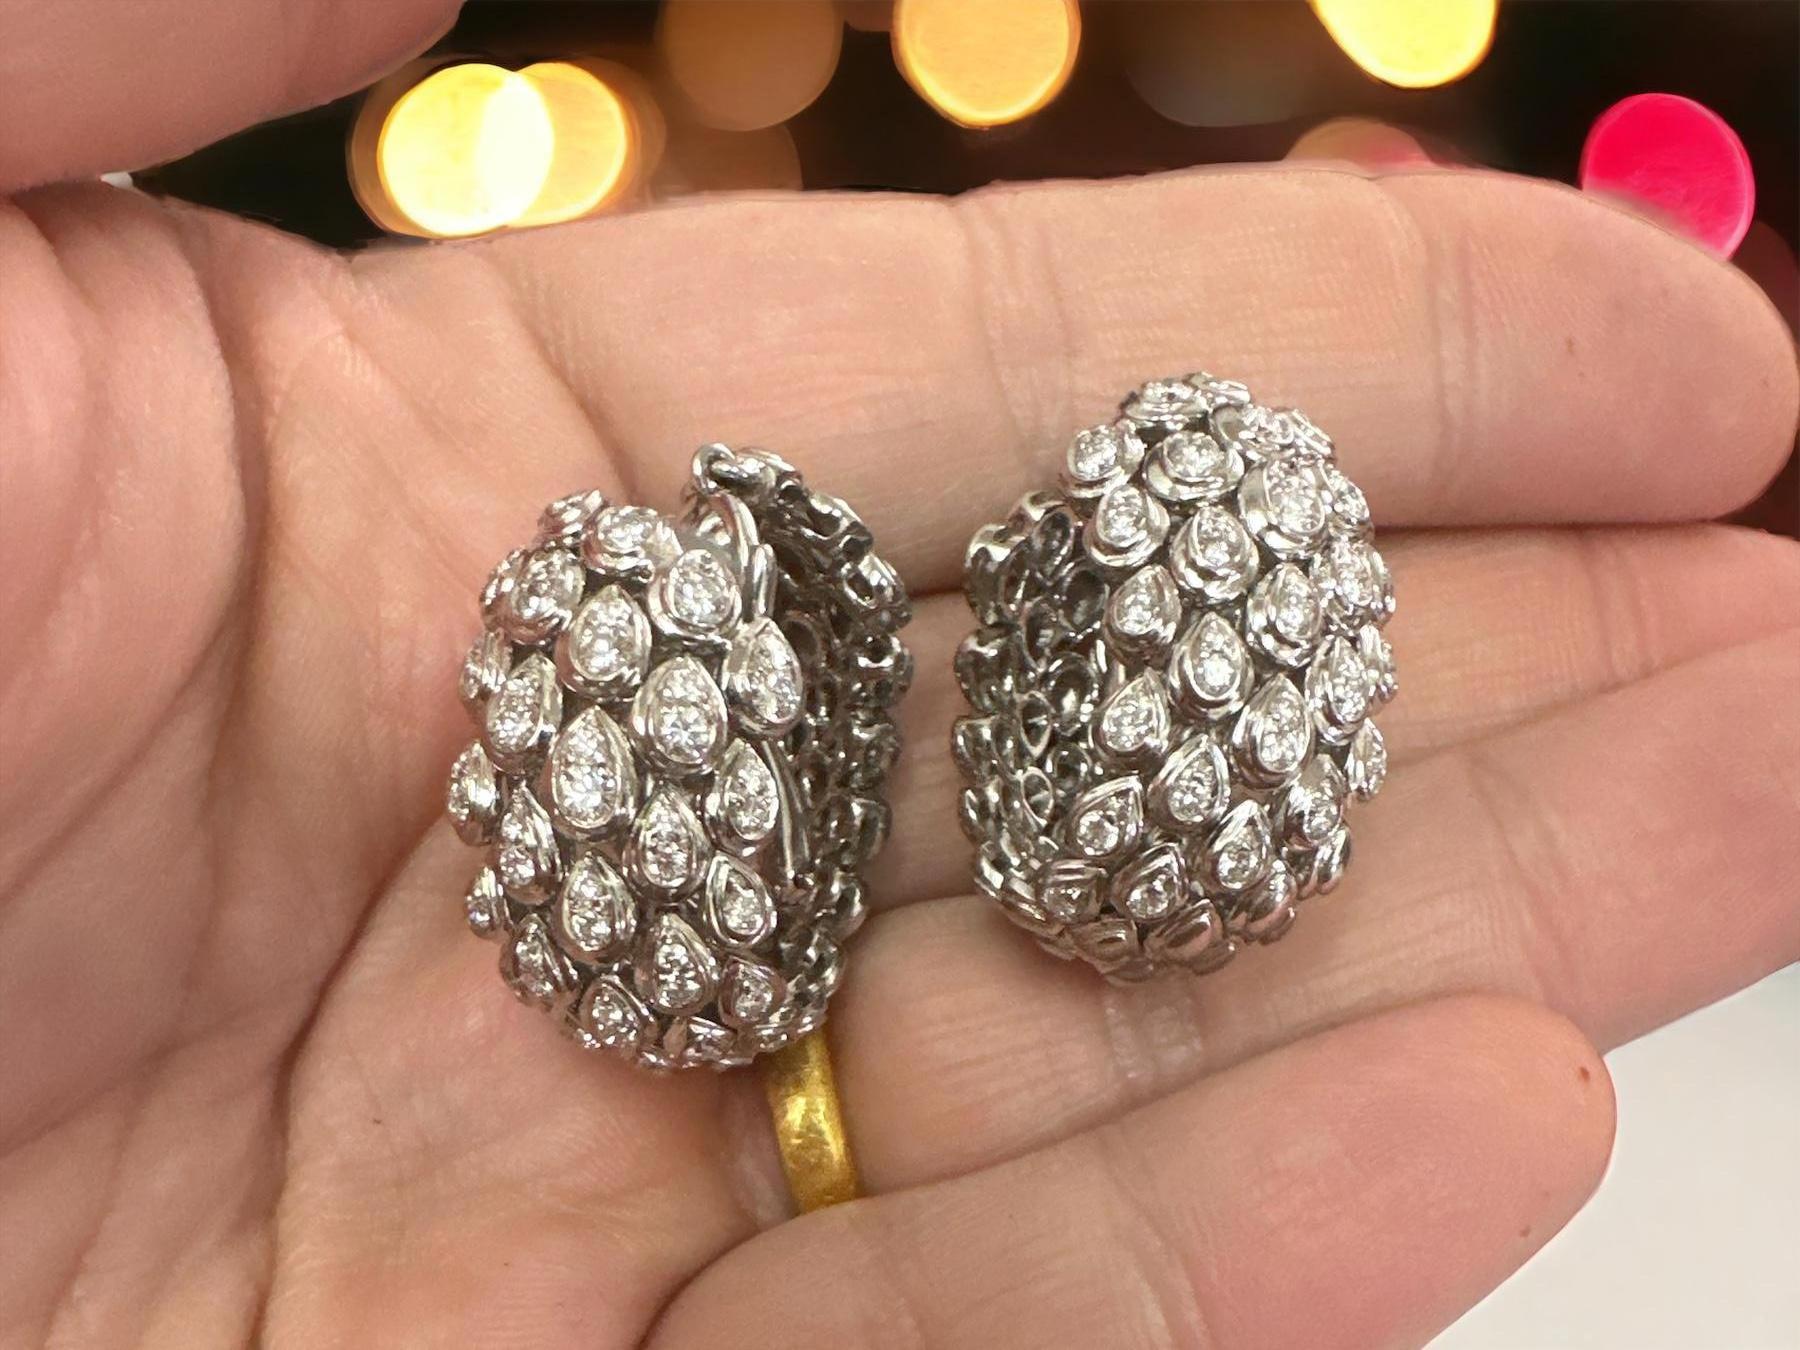 A stunning pair of 18kt white gold Faraone Italy diamond hoop earrings. These earrings represent a beautiful blend of Italian craftsmanship and luxury, and they are sure to be a captivating addition to any jewelry collection.

Faraone is a renowned